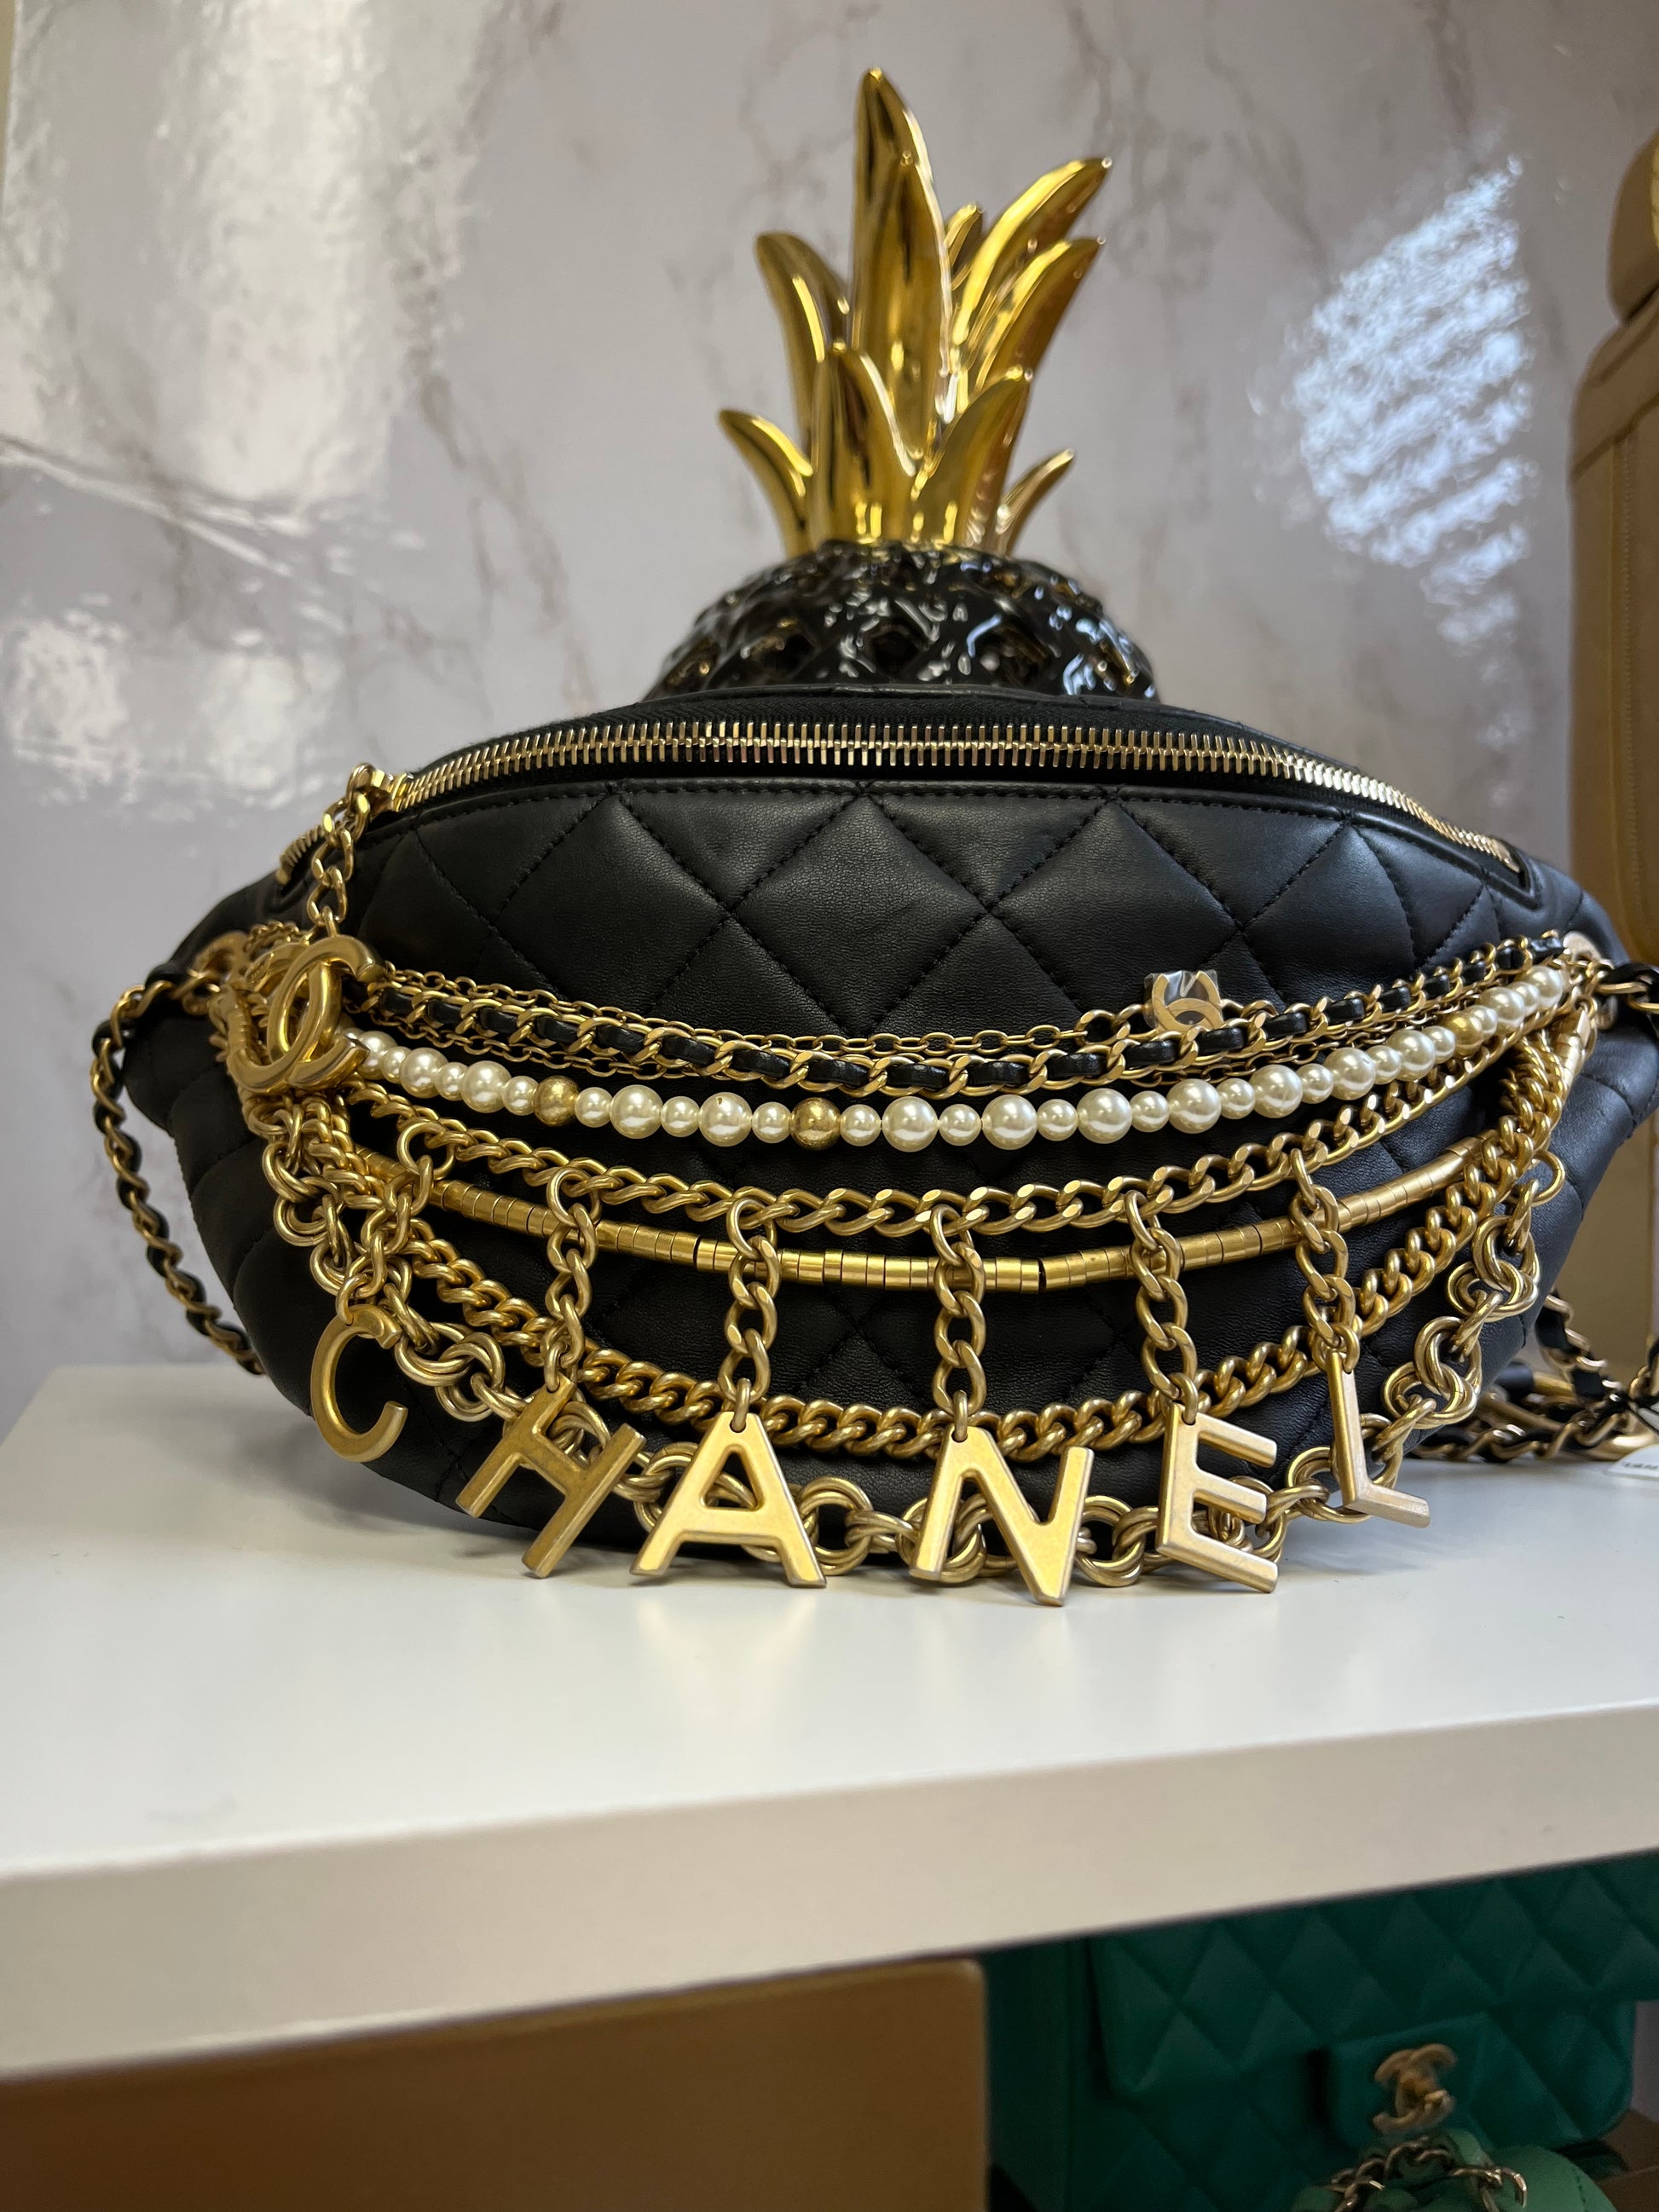 Limited 19A Chanel All About Chains Black XL Waist Bag Fanny Pack – Boutique  Patina